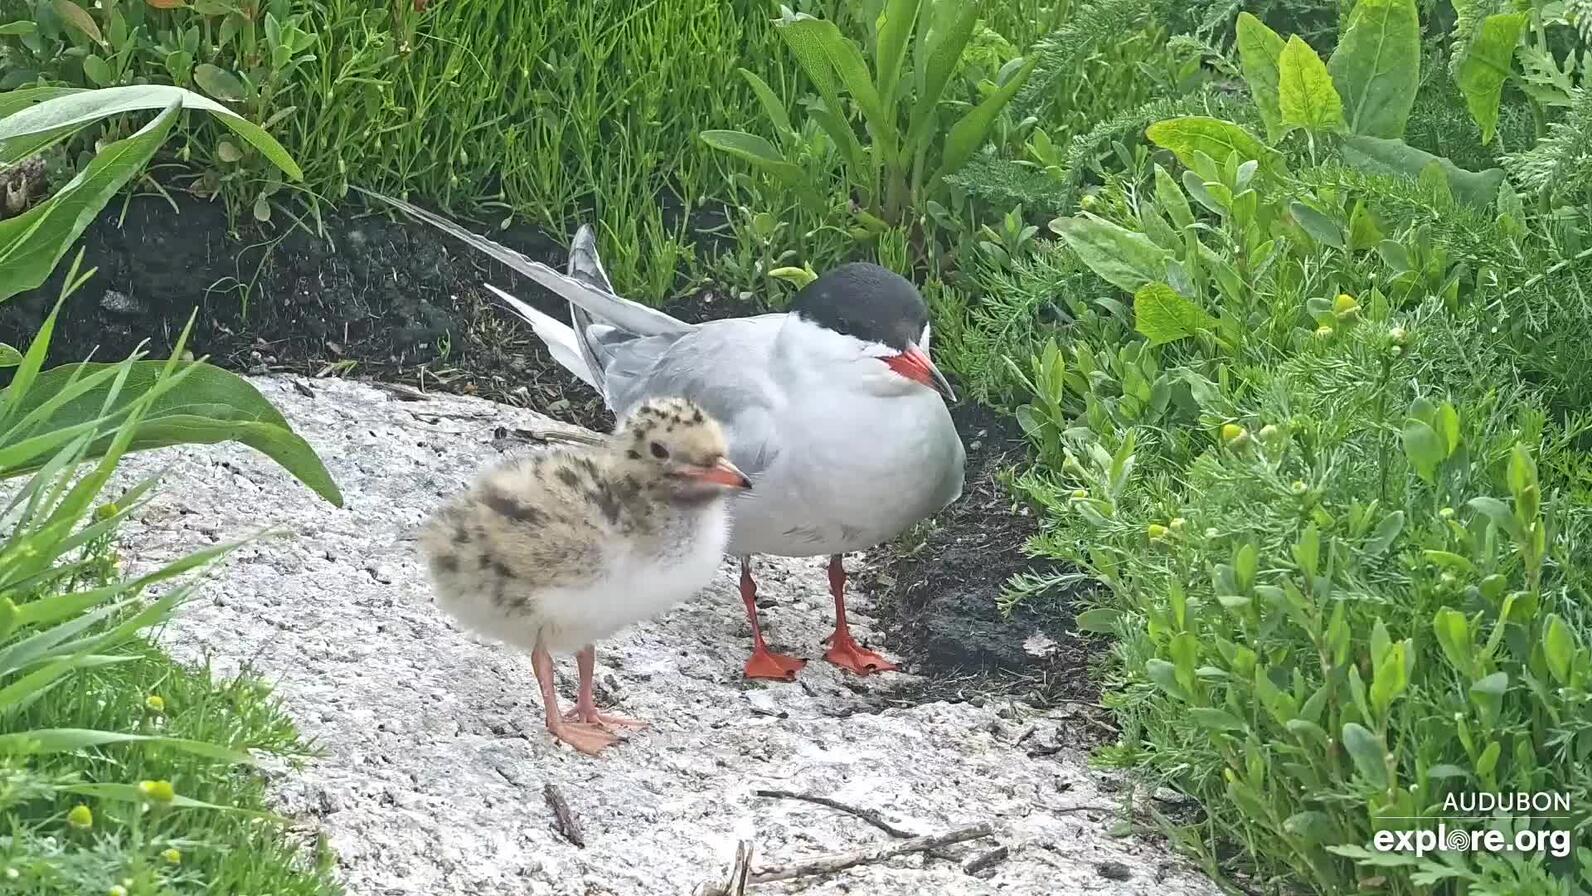 Tern and its chick having a play date